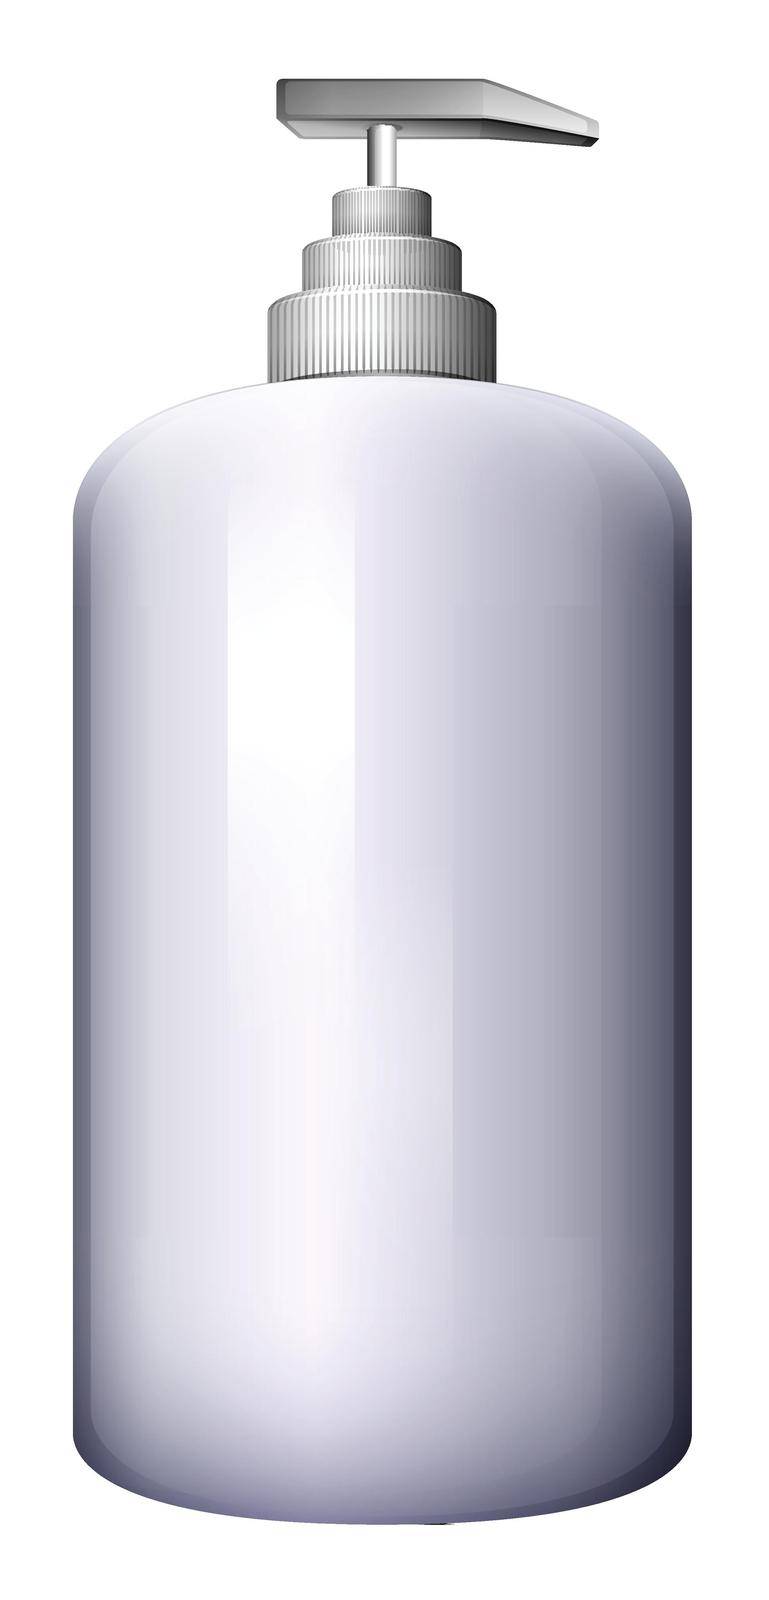 Illustration of a pump-style lotion bottle on a white background